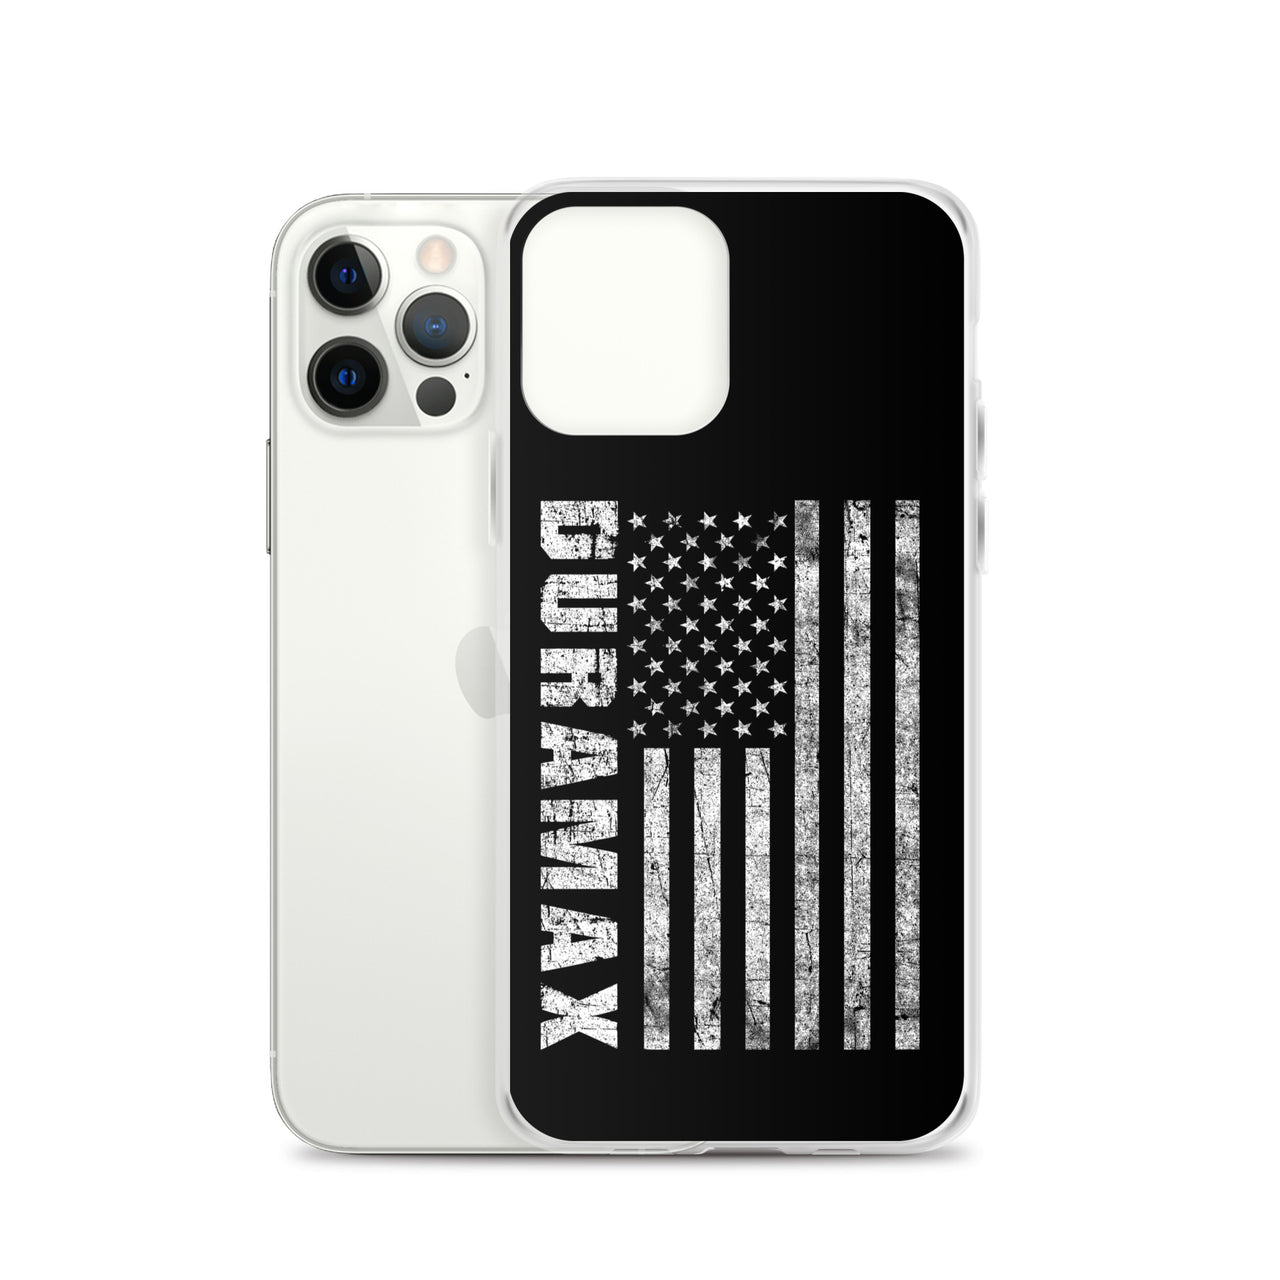 Duramax American Flag Protective Phone Case - Fits iPhone 12 pro